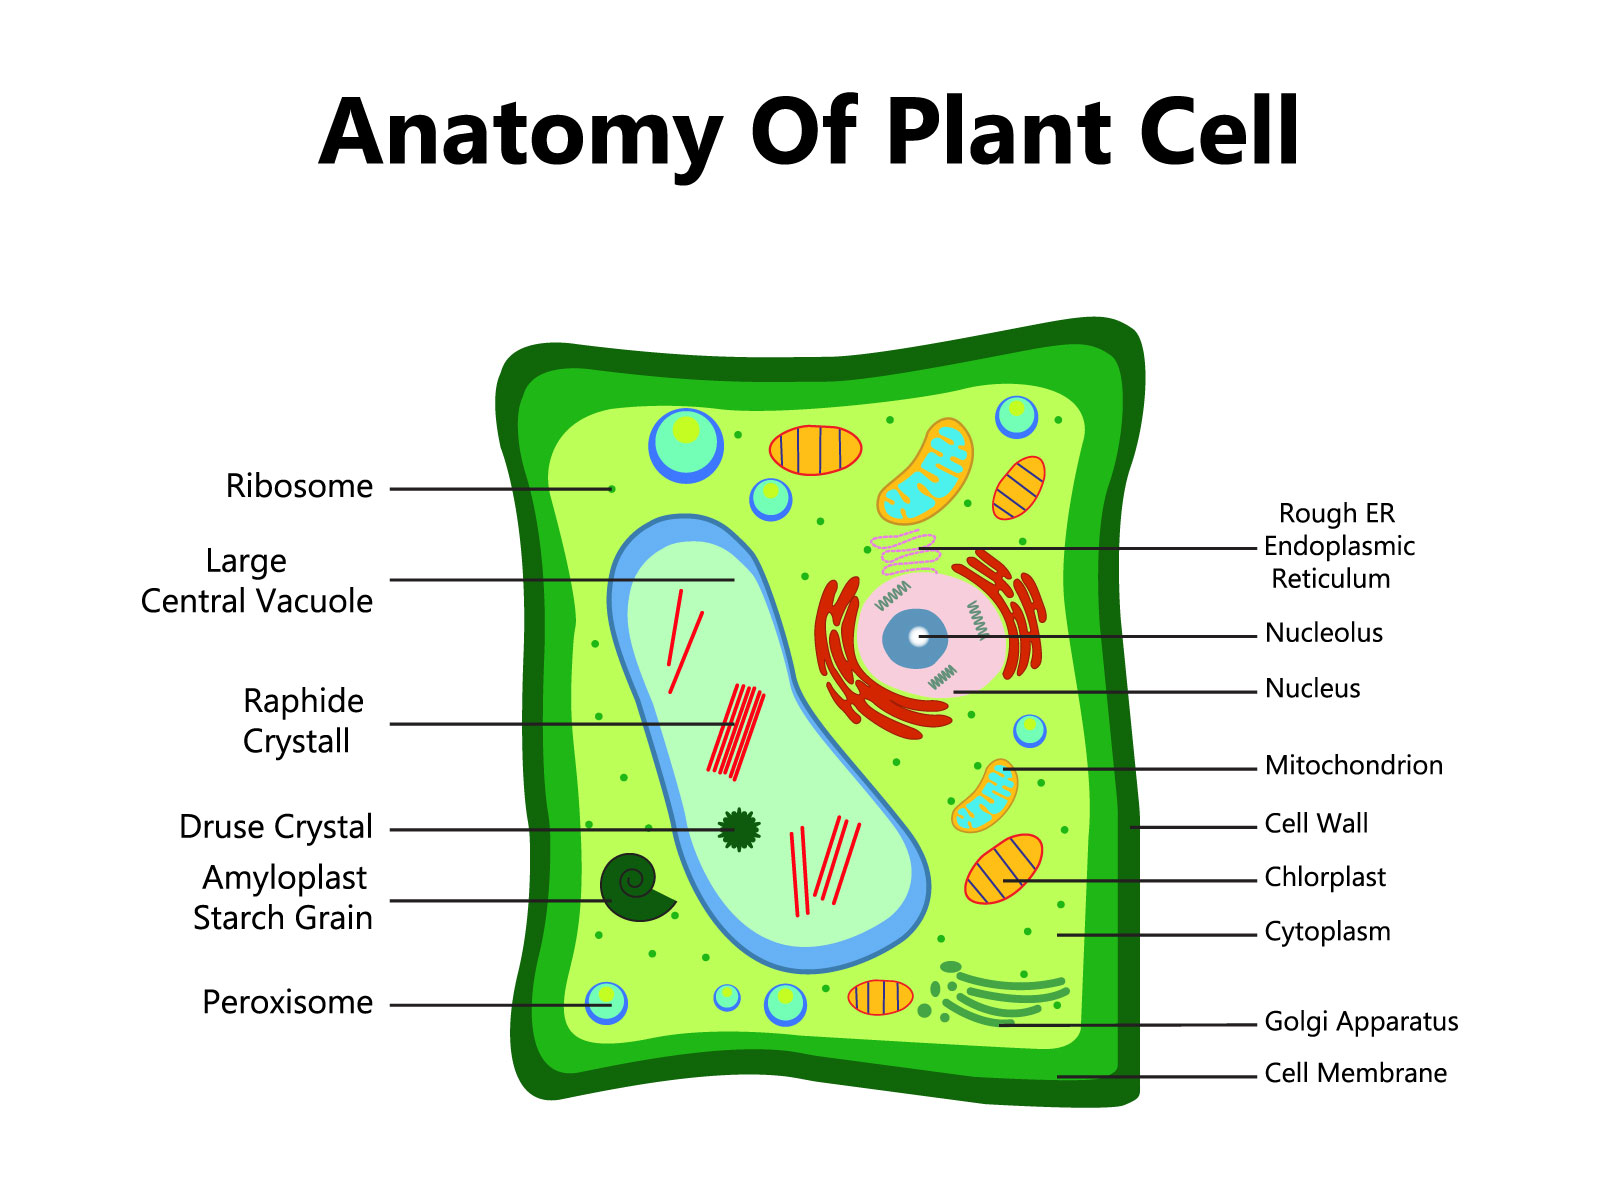 Plant cell, drawing - Stock Image - C004/4381 - Science Photo Library